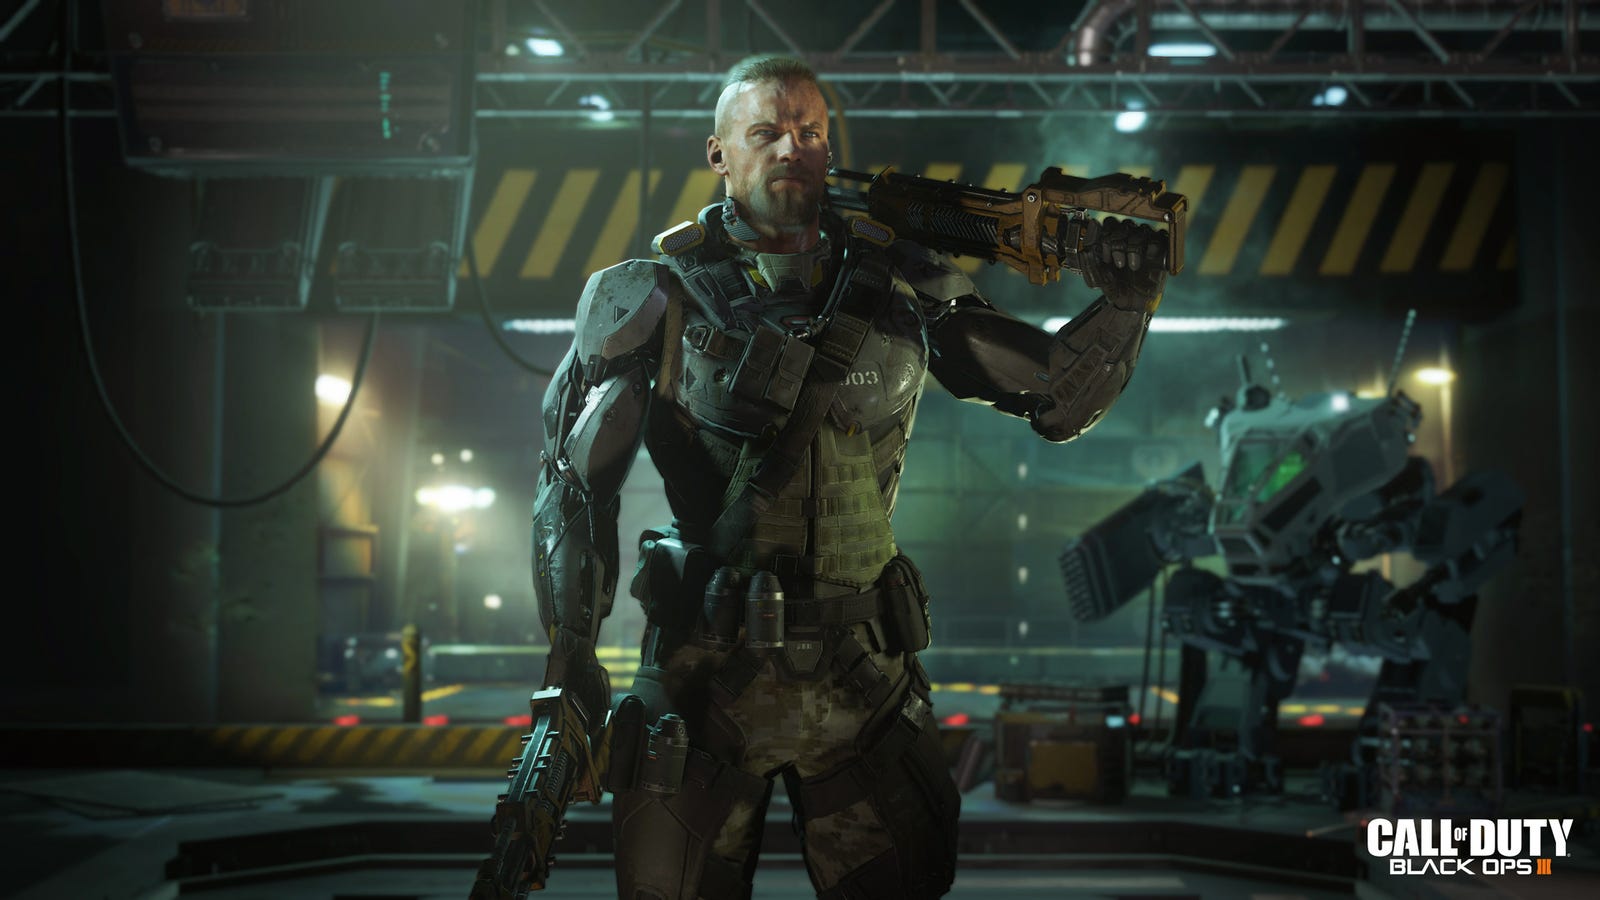 Sources: Call of Duty 2020 In Upheaval As Treyarch Takes Over, Plans Black Ops 5 - Kotaku thumbnail